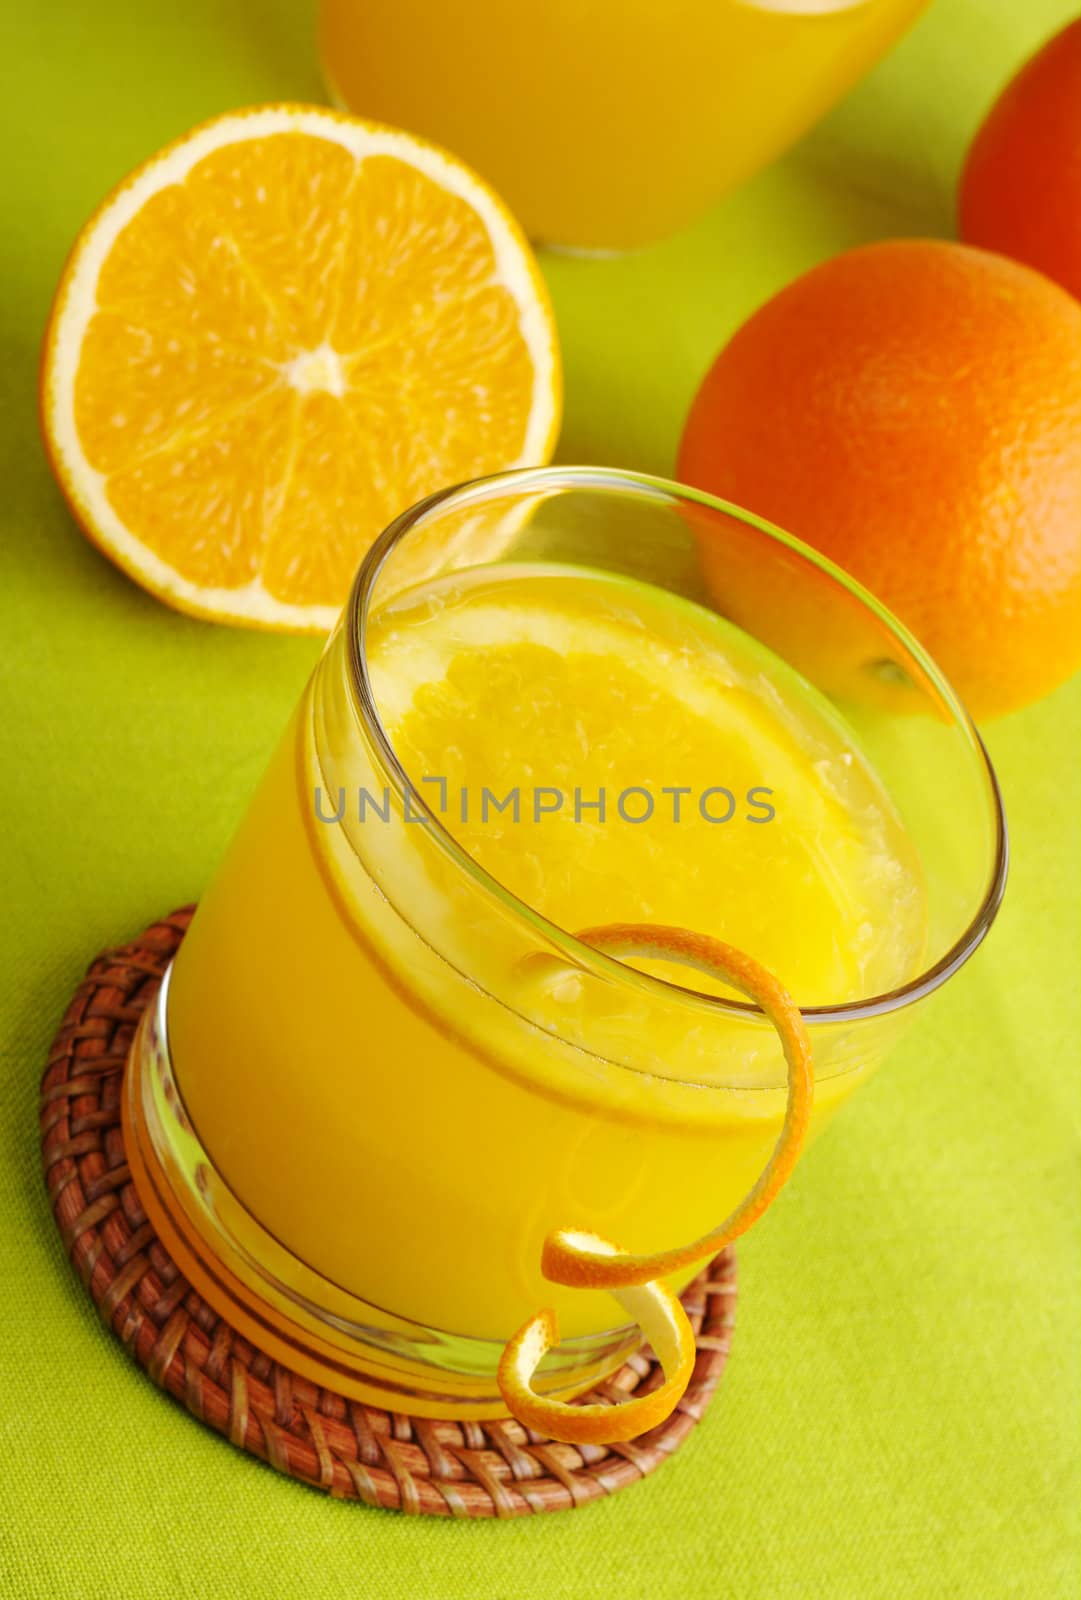 Fresh orange juice with orange slice in glass and oranges in background on green table mat (Selective Focus)